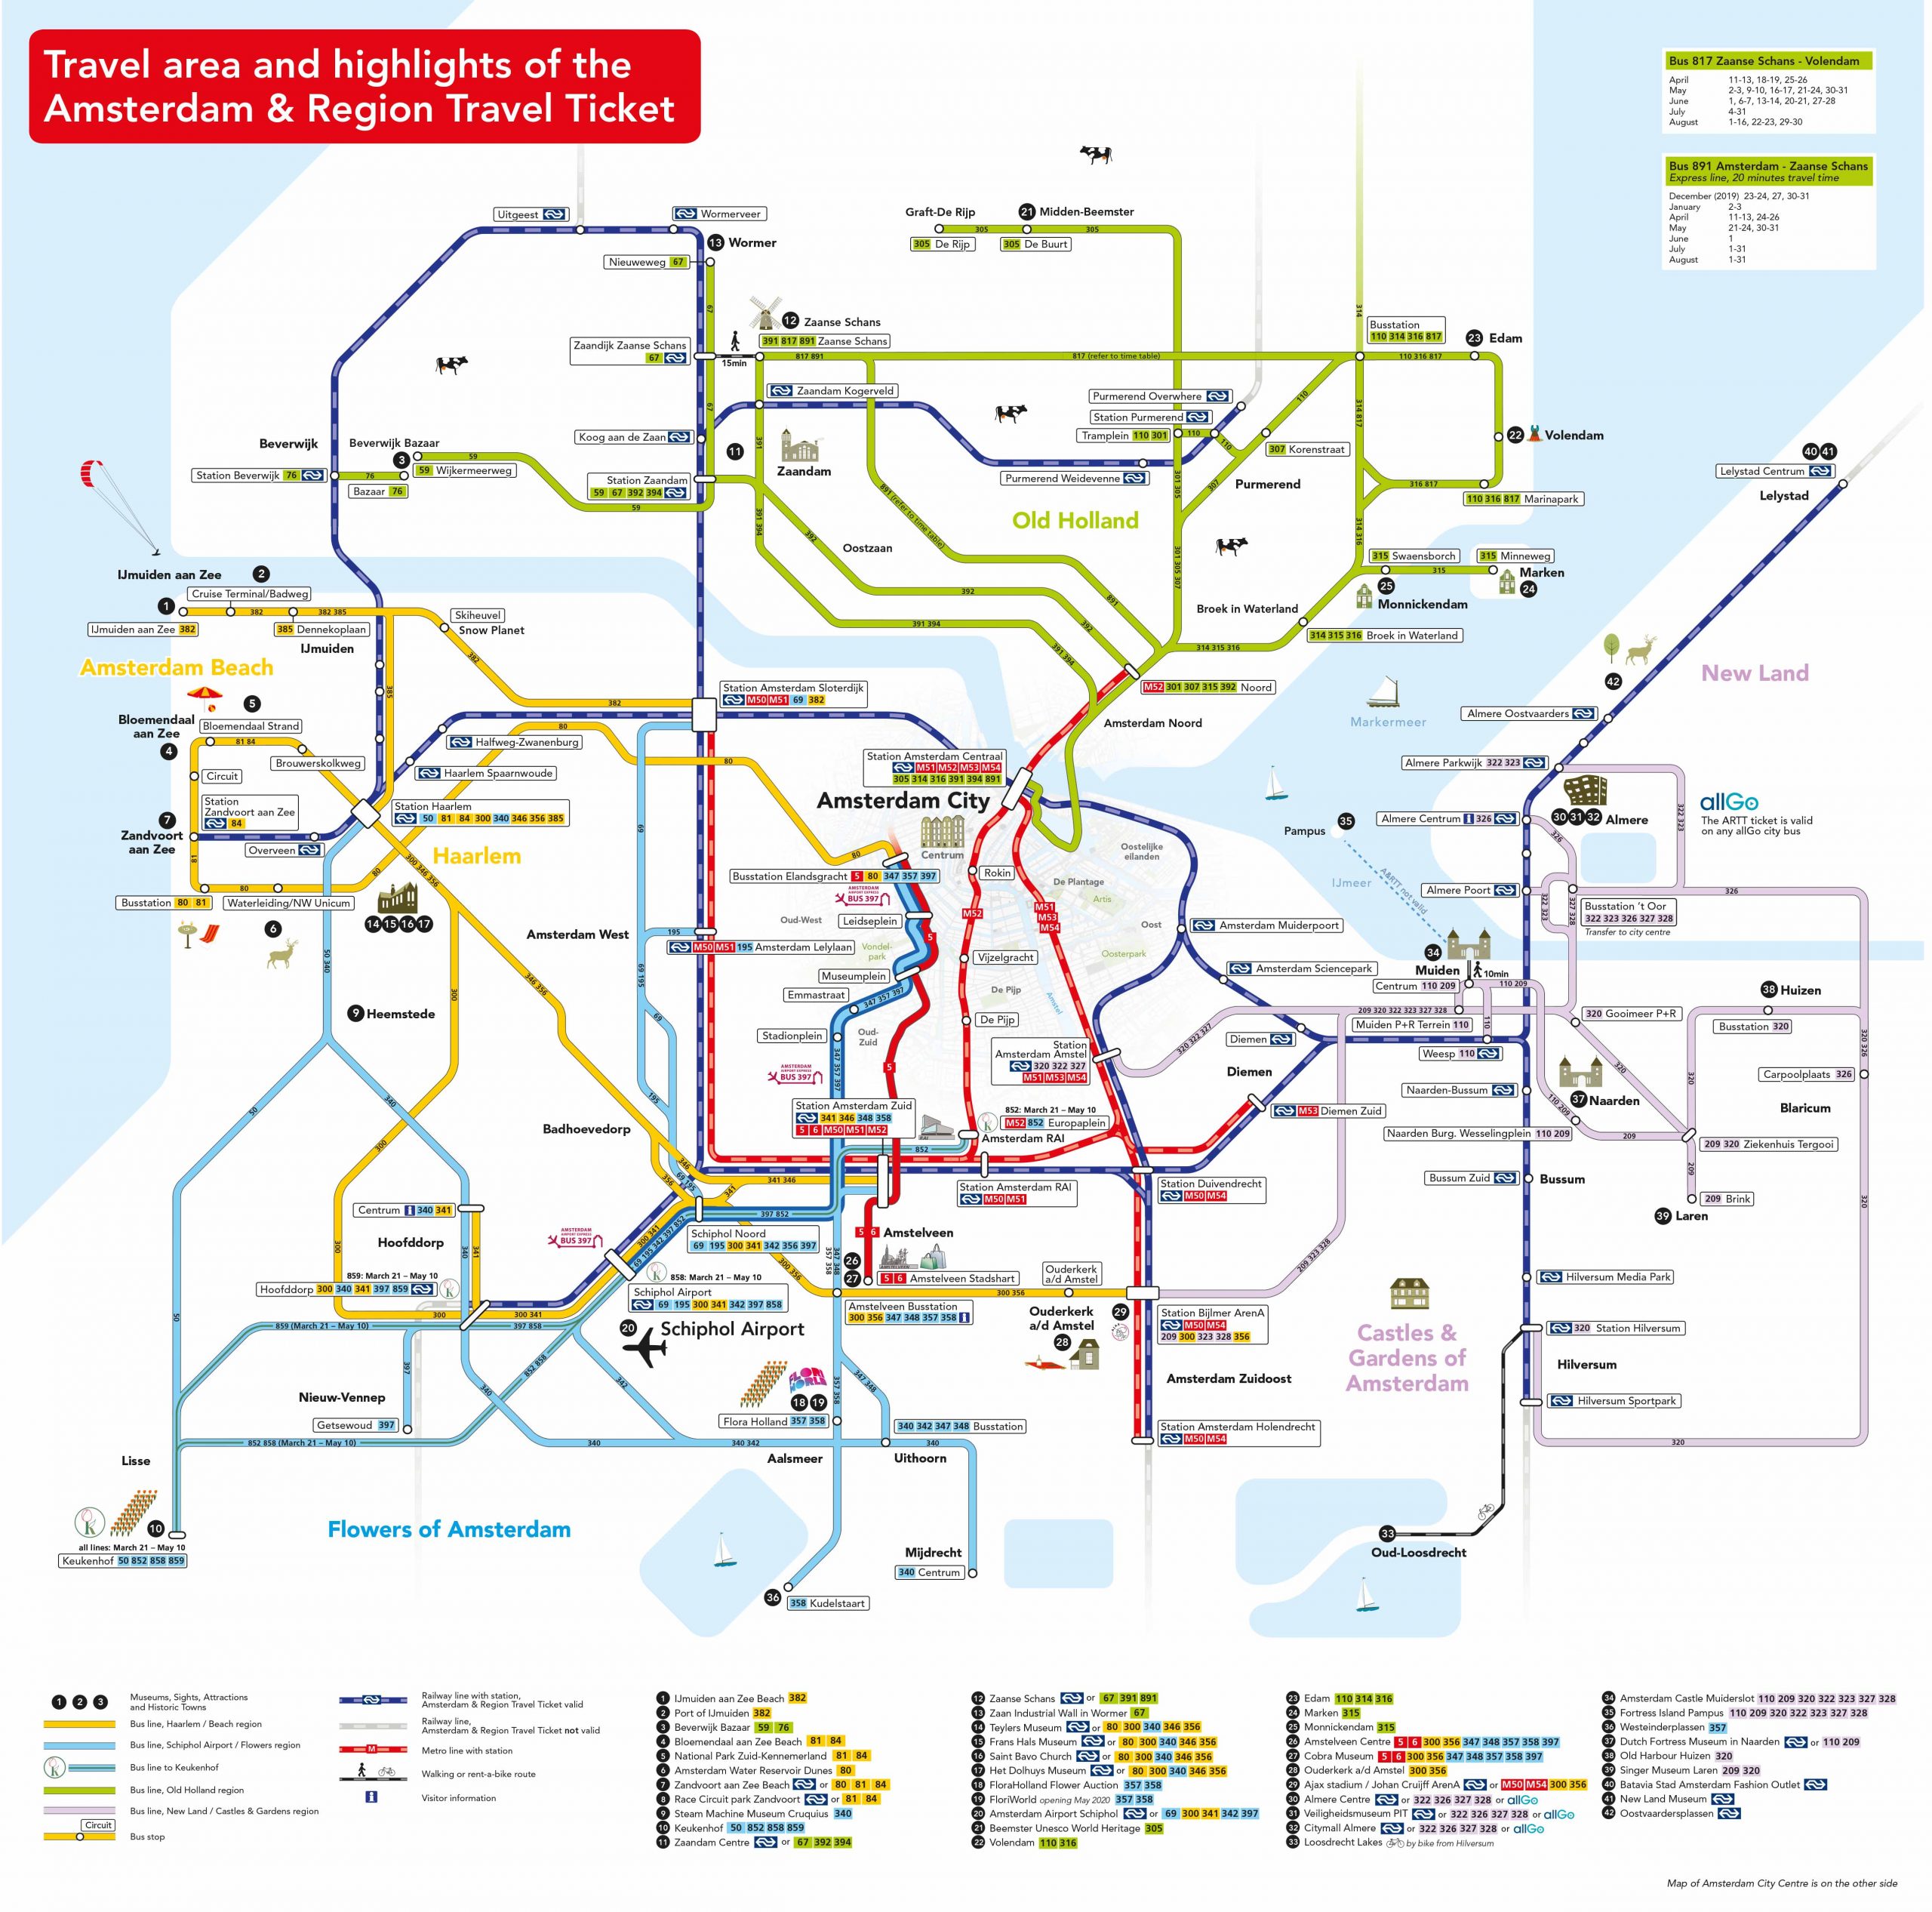 Amsterdam Route Map for Day ticket